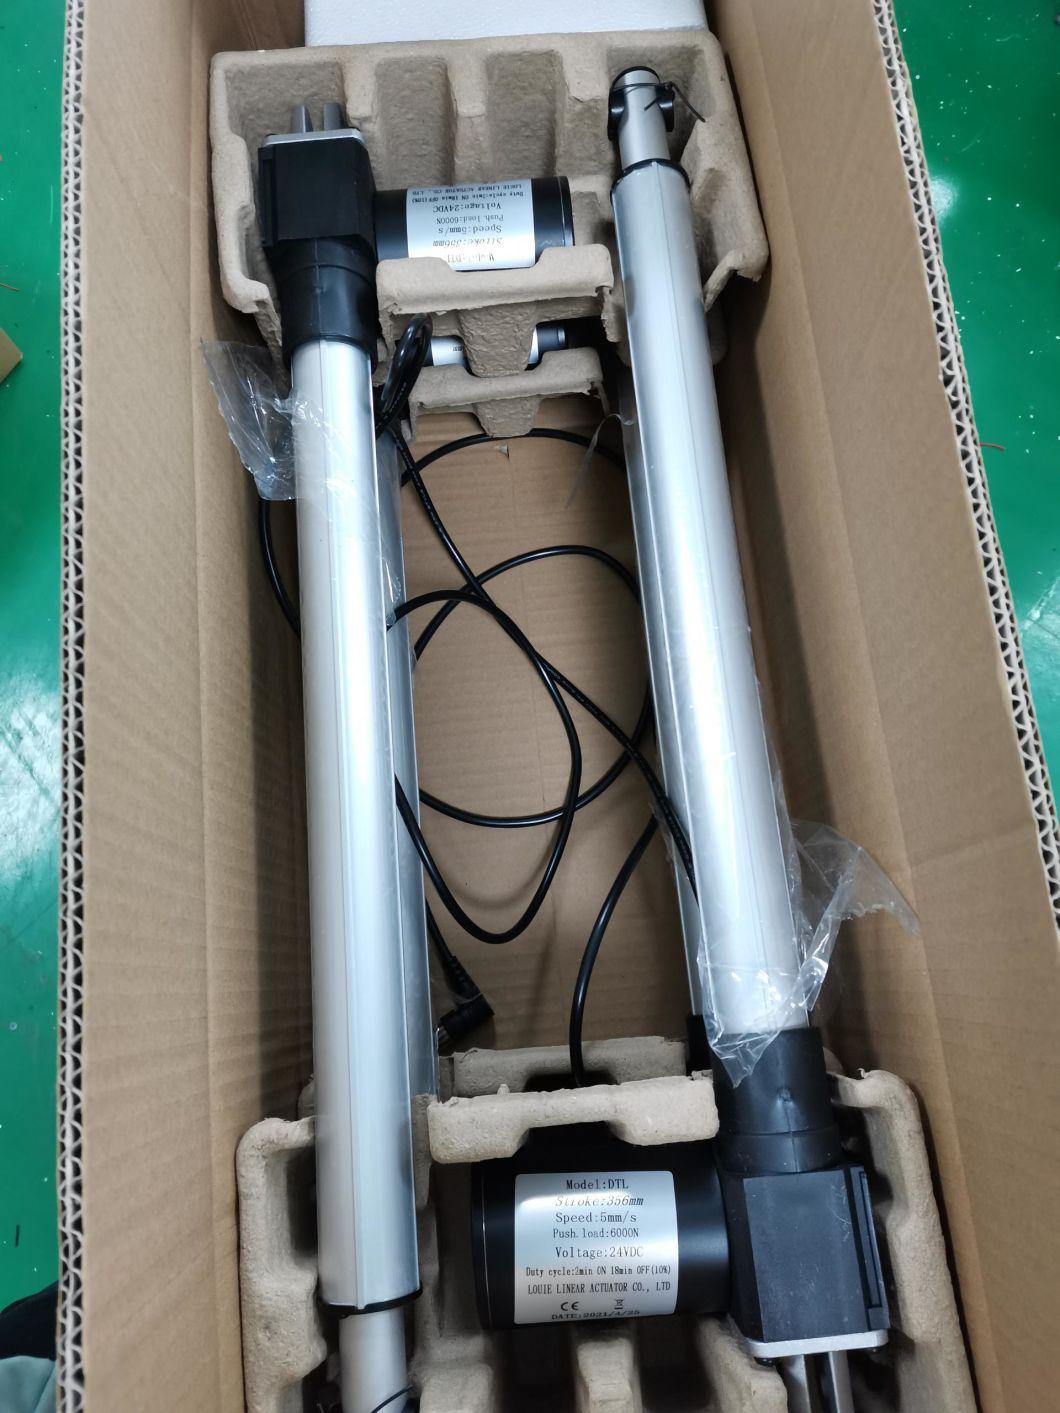 Gear Motor Electric Linear Actuator for Furniture Bed Sofa